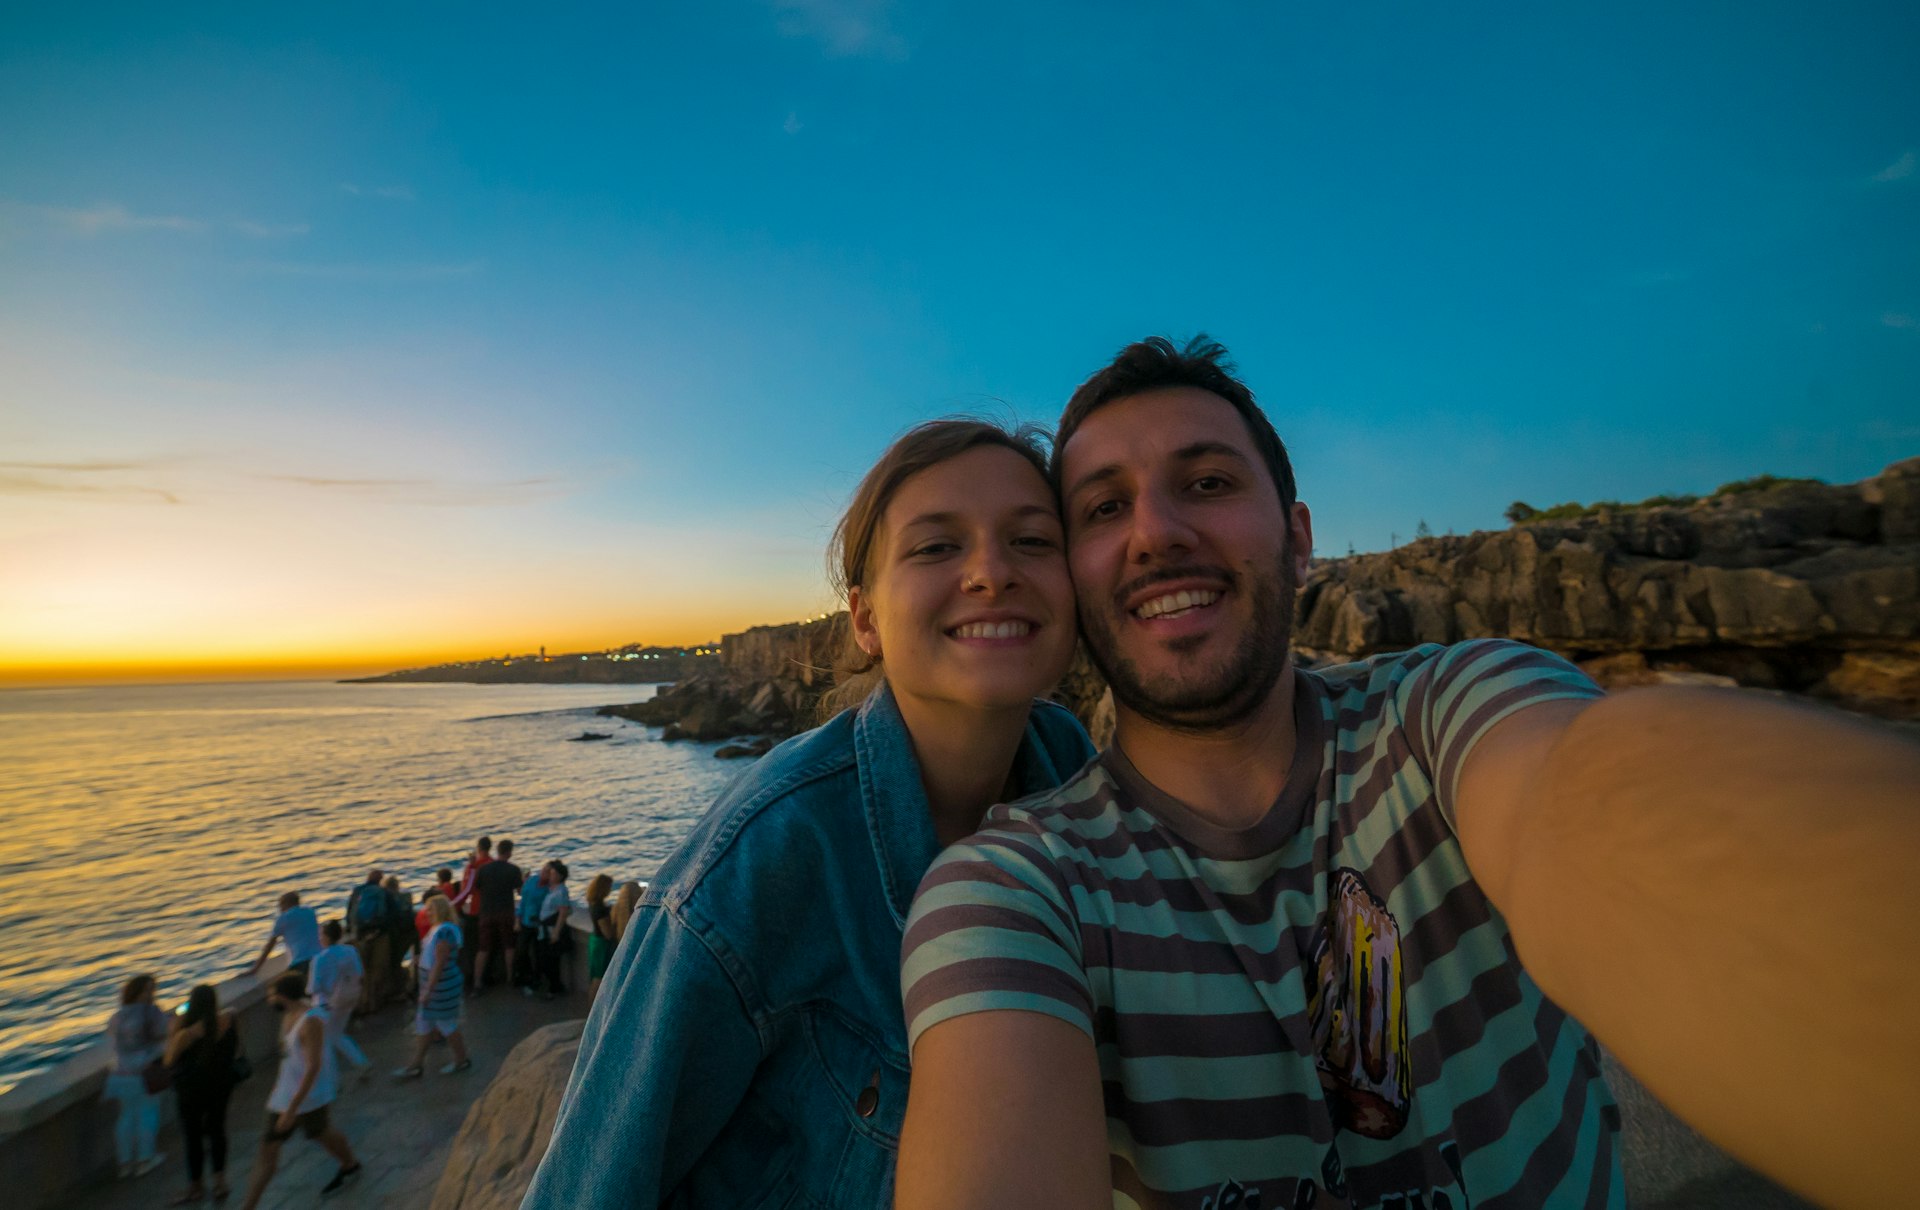 A happy couple taking selfie in Cascais, Portugal during sunset